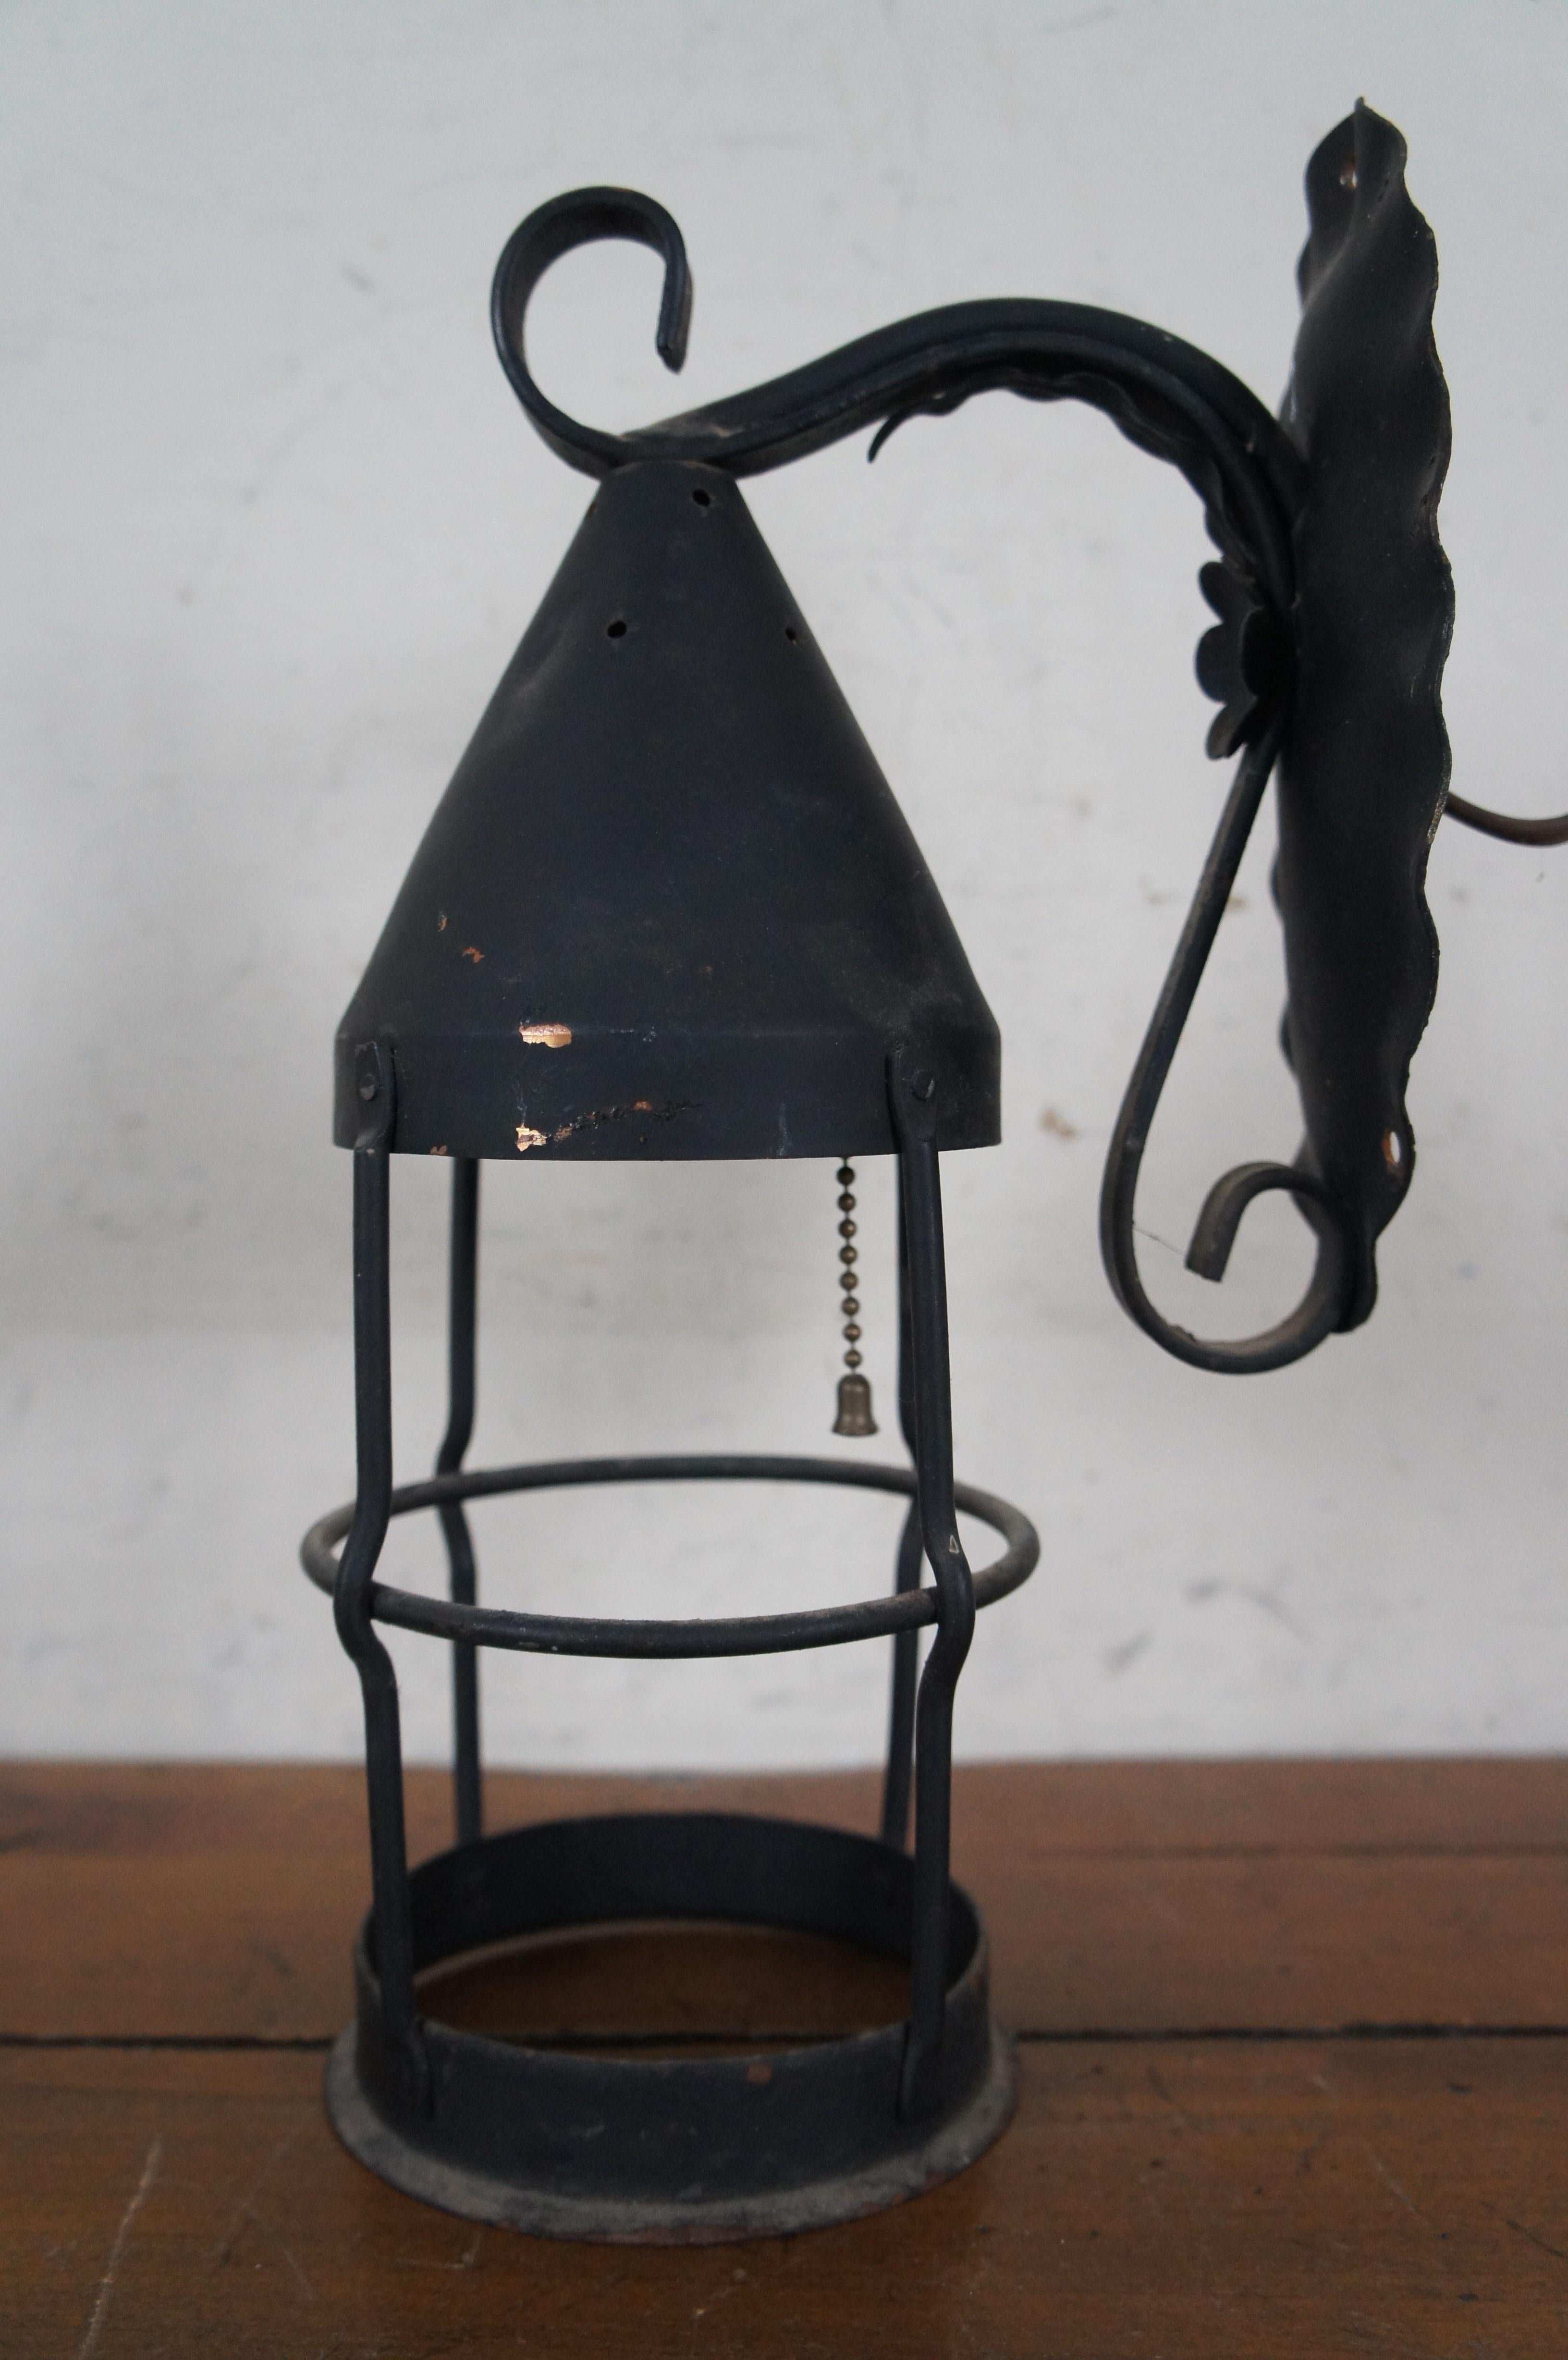 Vintage Gothic Scrolled Iron Wall Hanging Storybook Lantern Sconce Light 12